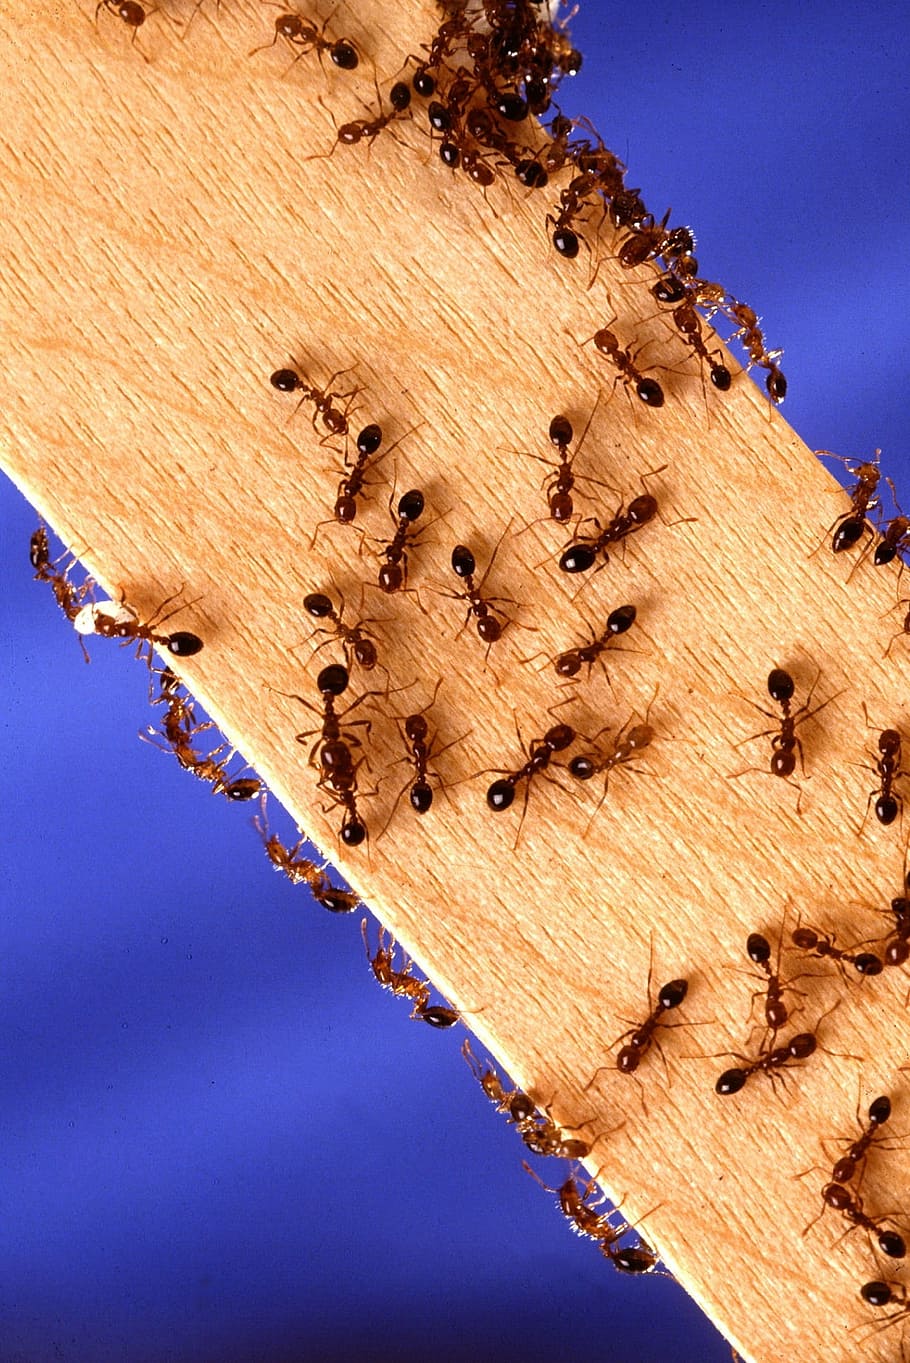 black, brown, ants, plank, fire ants, insects, worker, pest, macro, sting